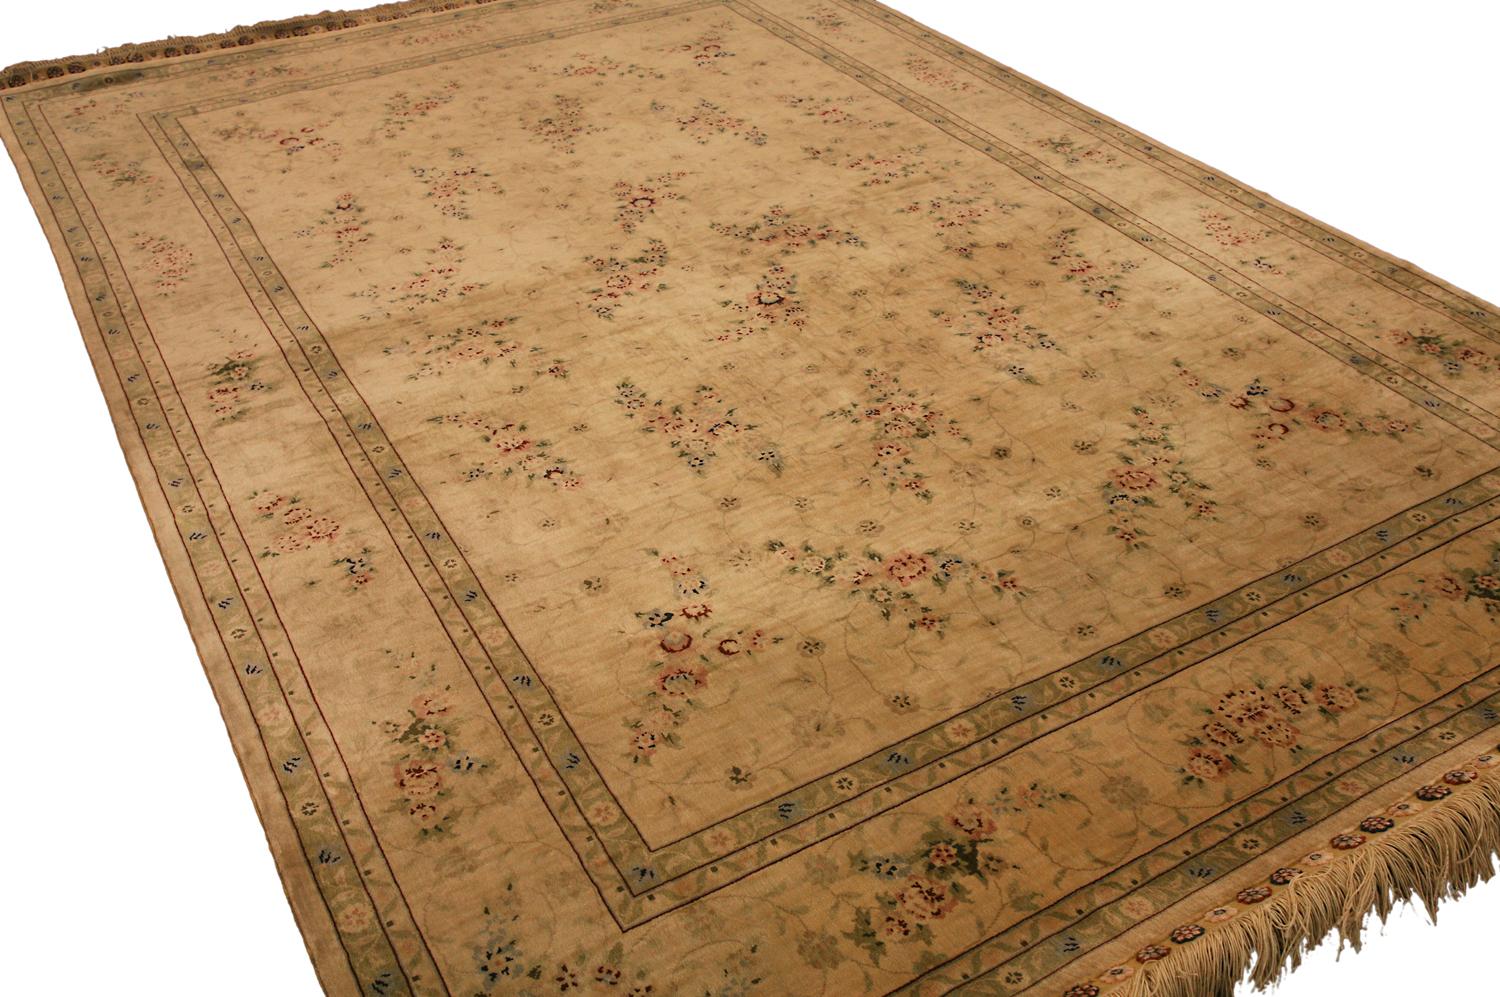 This is a Chinese Hereke silk rug woven during the 21st century that contains a signature that says “Yasamin” and measures 187 x 125 CM in size. This piece has an all-over field design with repeating floral motifs with blossoming flowers